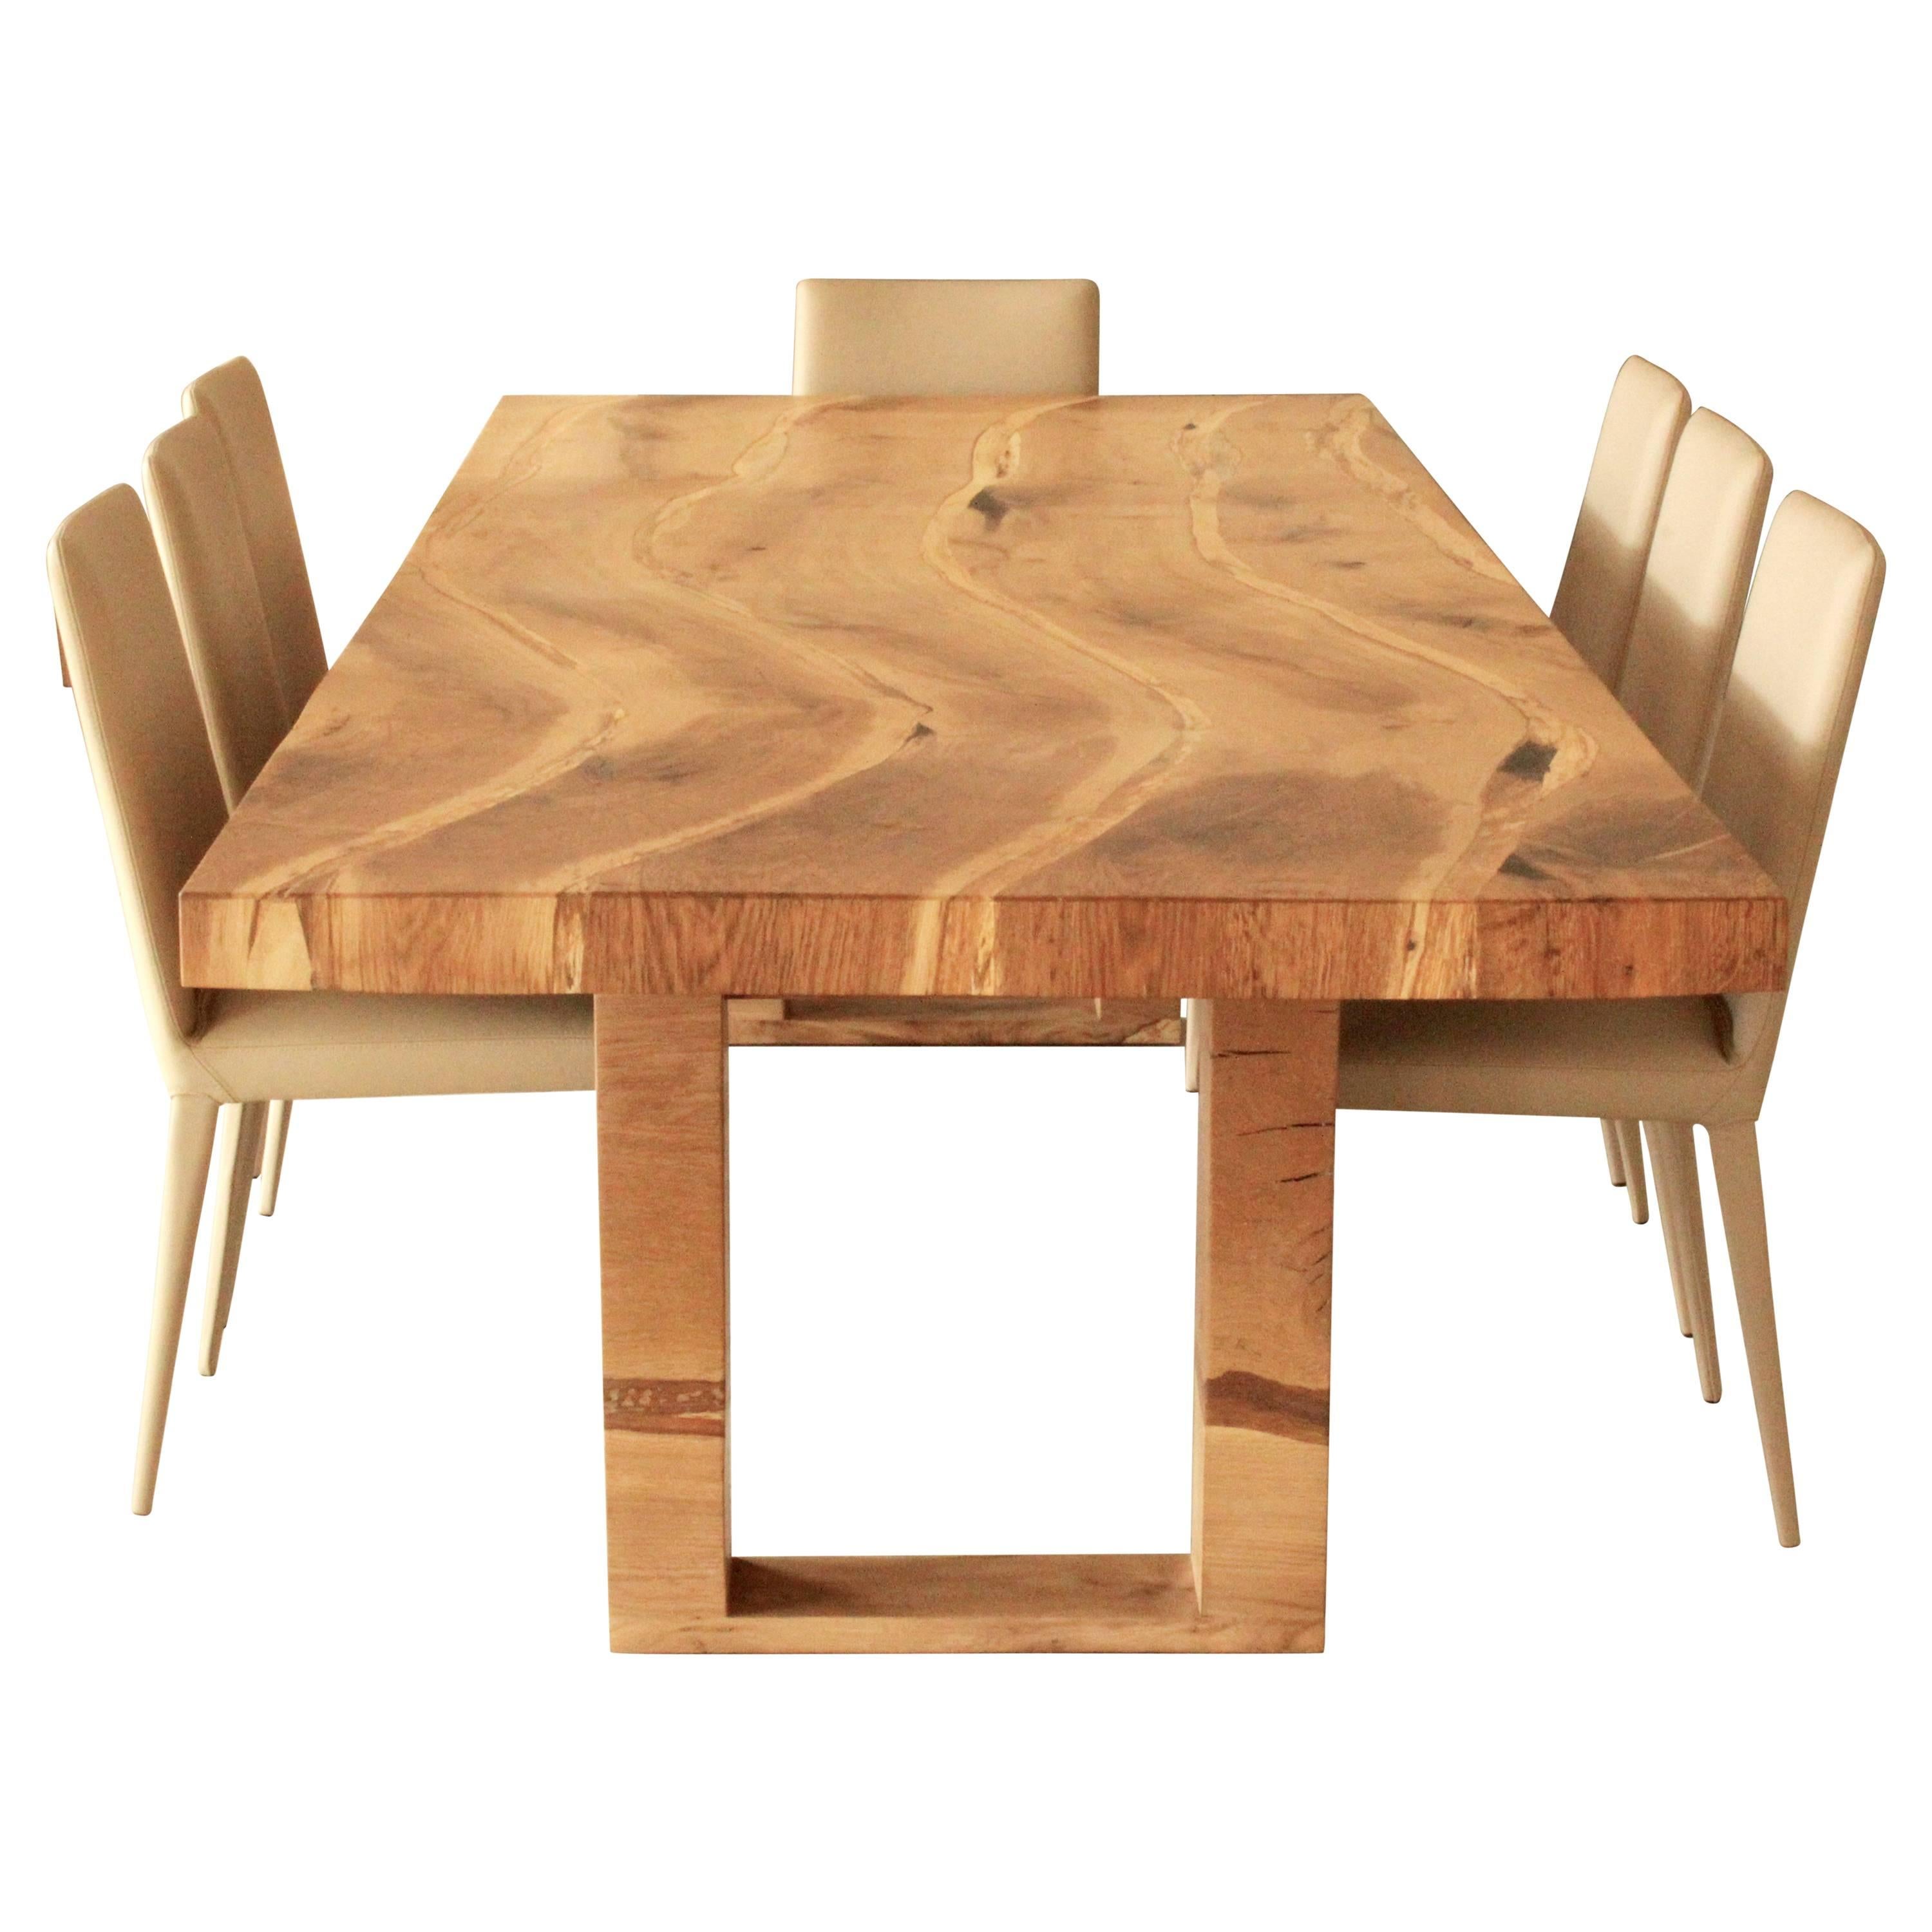 Salvaged English Oak Dining Table by Jonathan Field. Inset live edge.